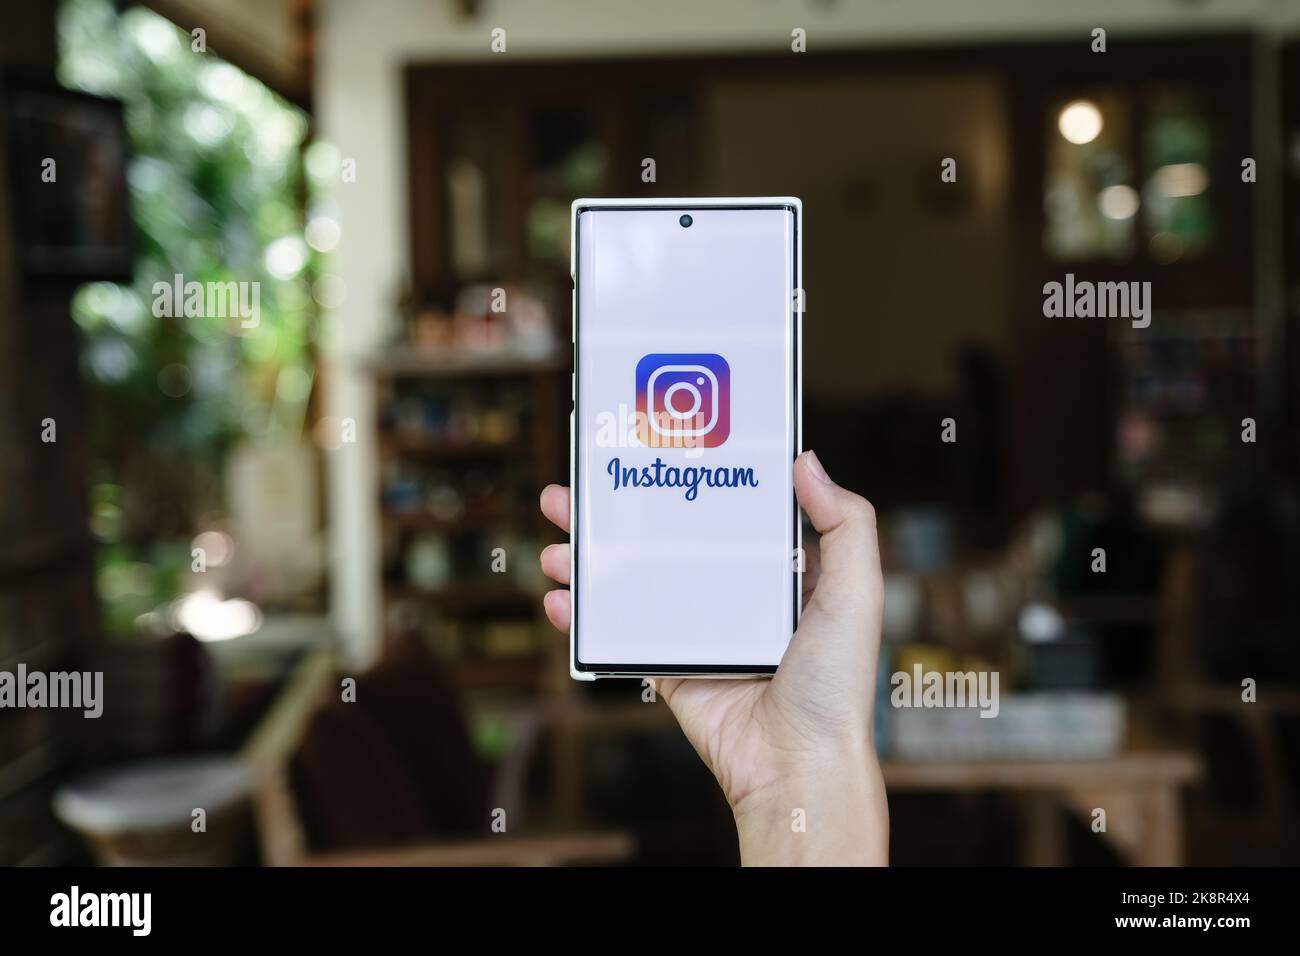 CHIANGMAI, THAILAND - July 09, 2021: A woman holding smartphone with Instagram application on the screen. Instagram is a photo sharing app for Stock Photo